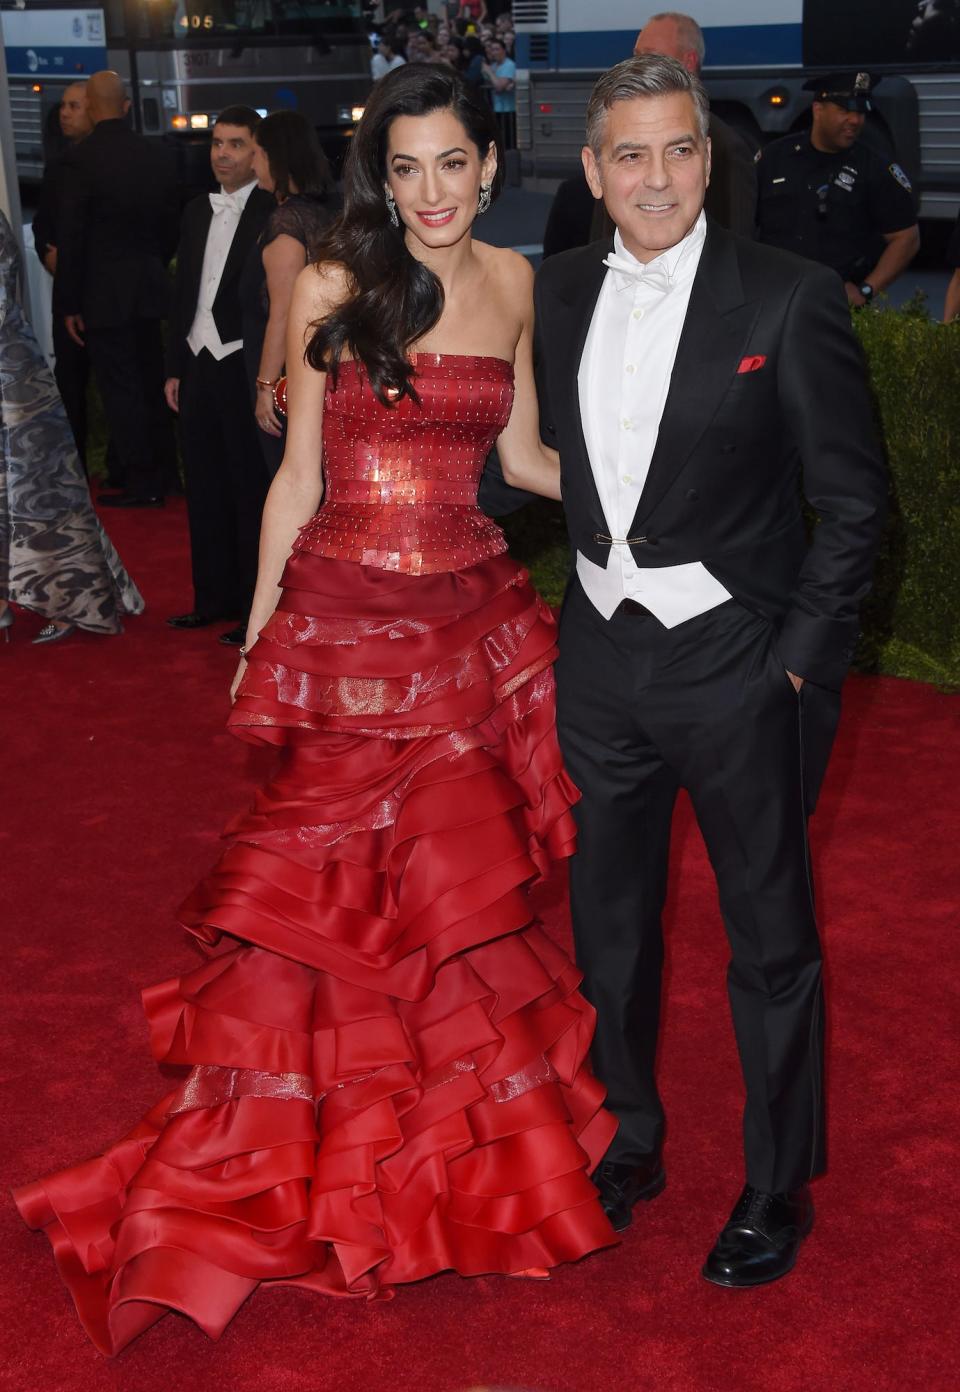 Amal Clooney and George Clooney at the Met Gala on May 4, 2015.